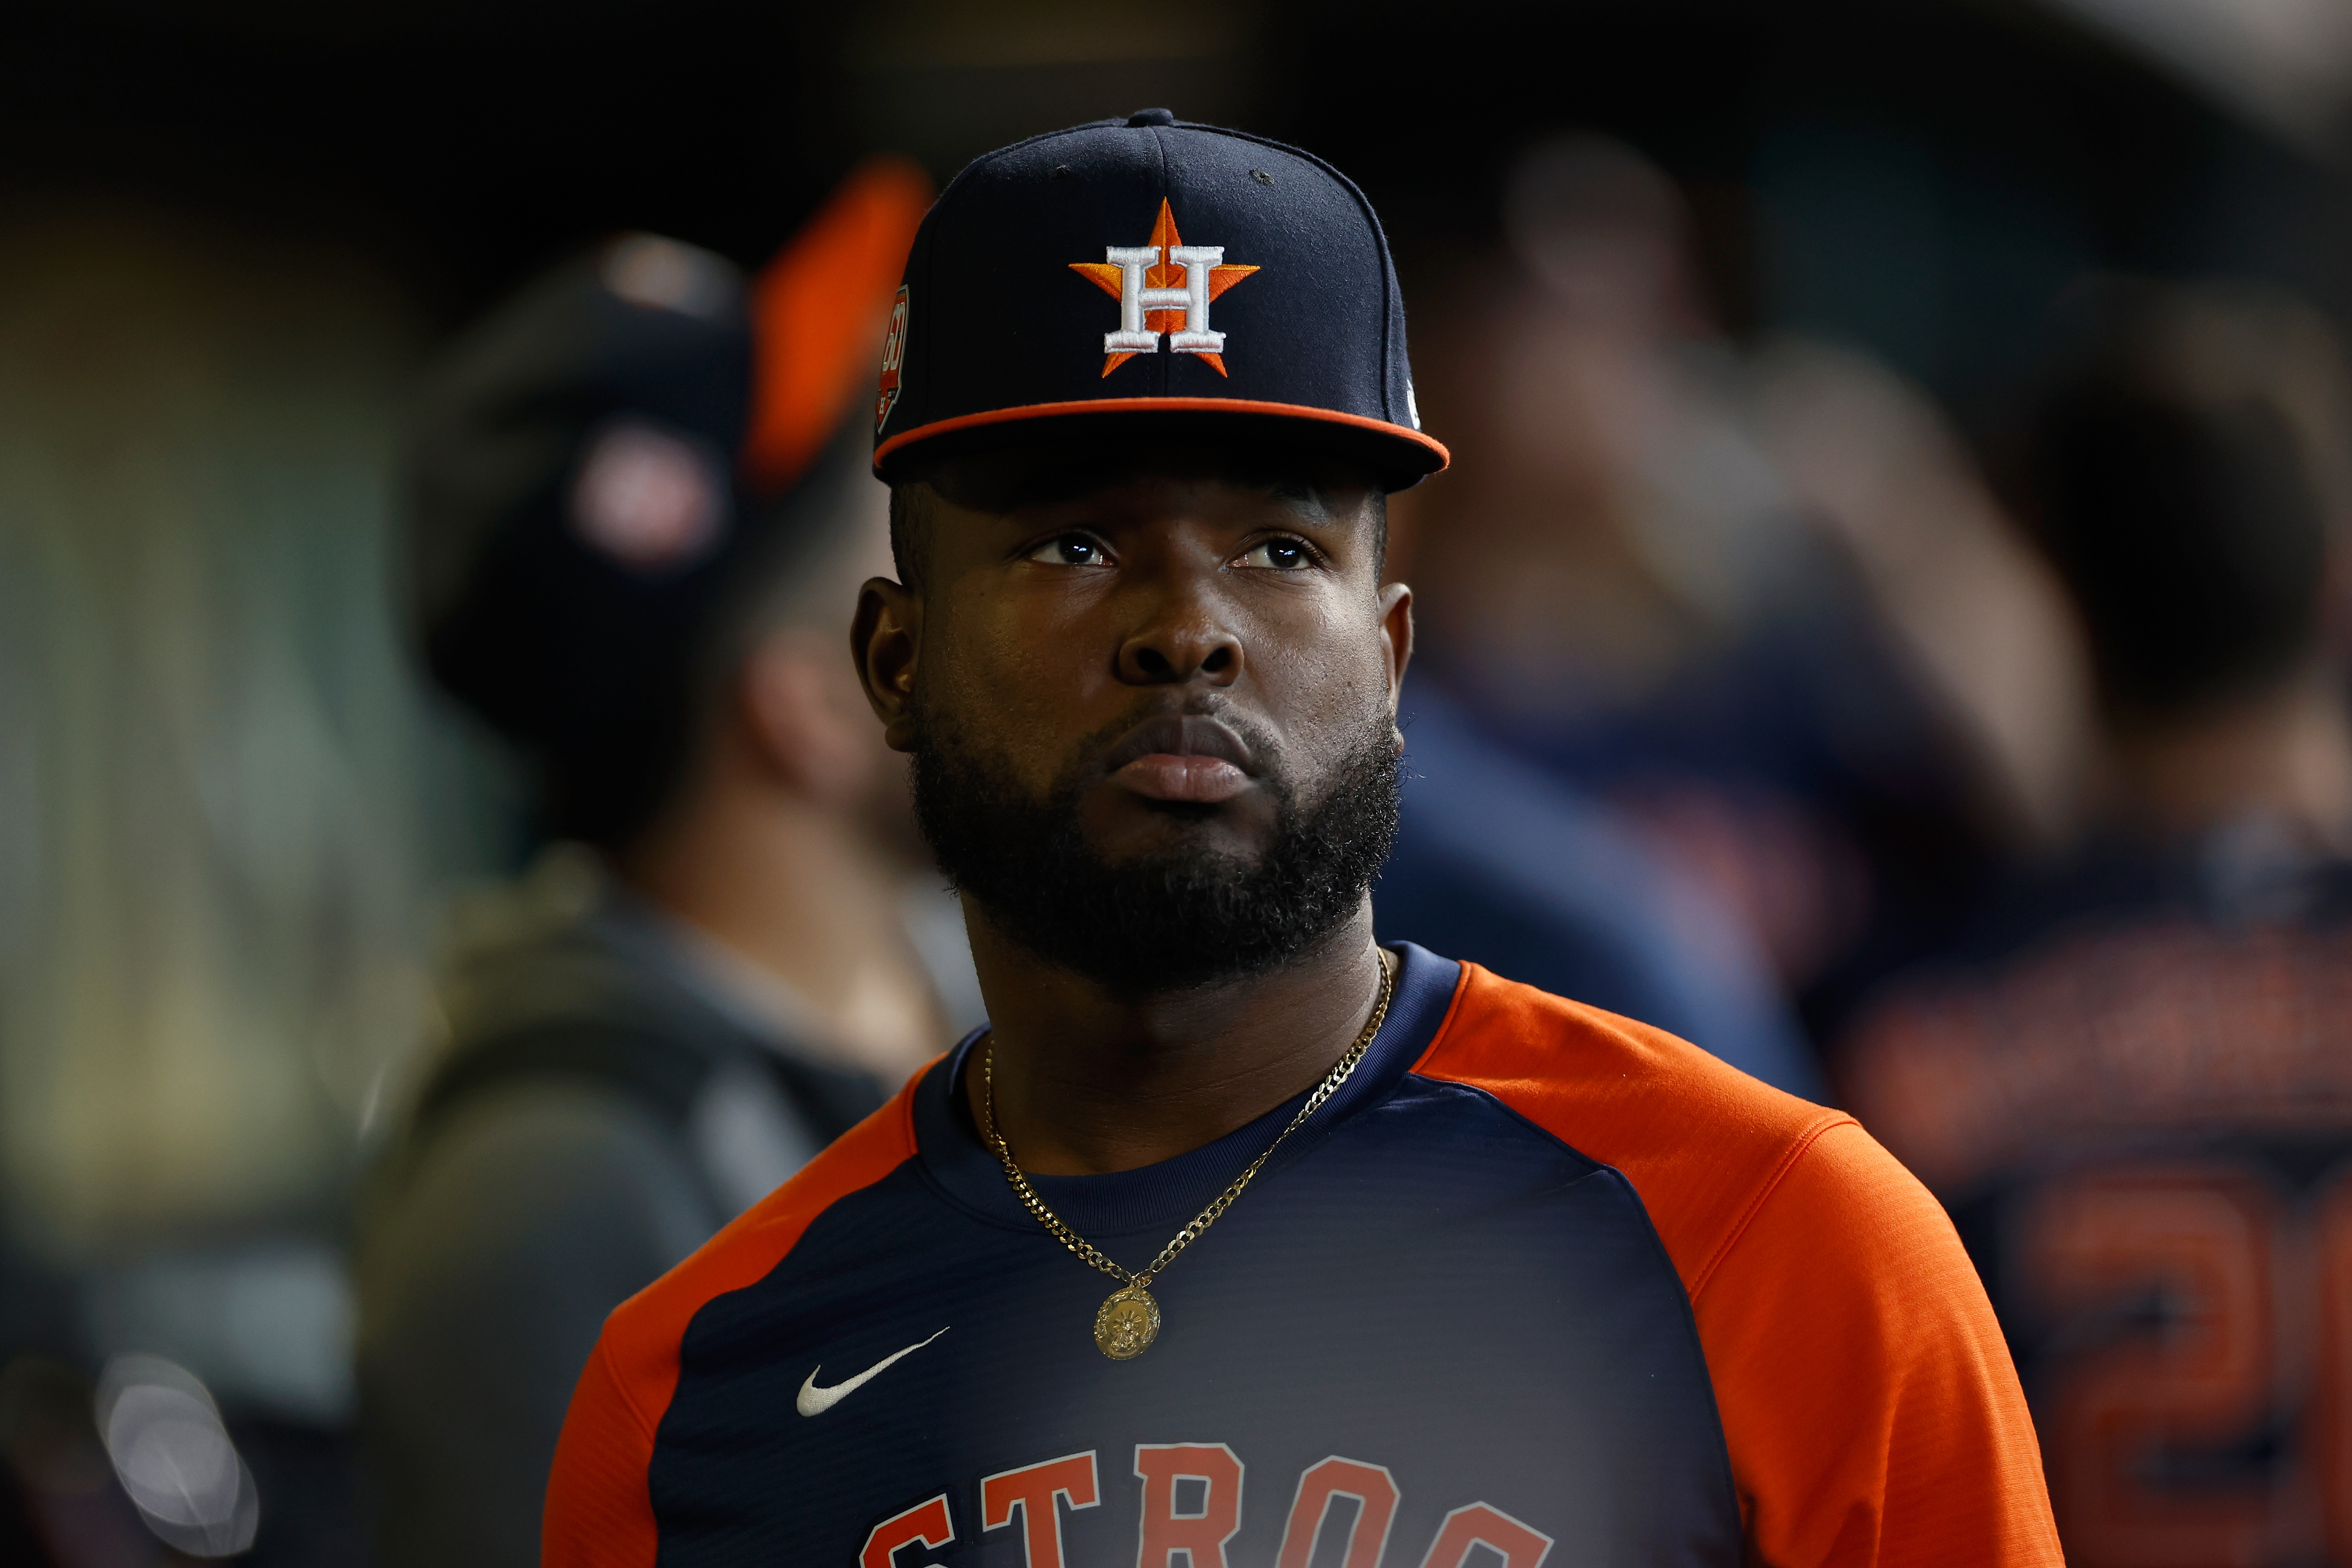 2019 AL West Preview: Houston Astros, prospects and 2021 outlook